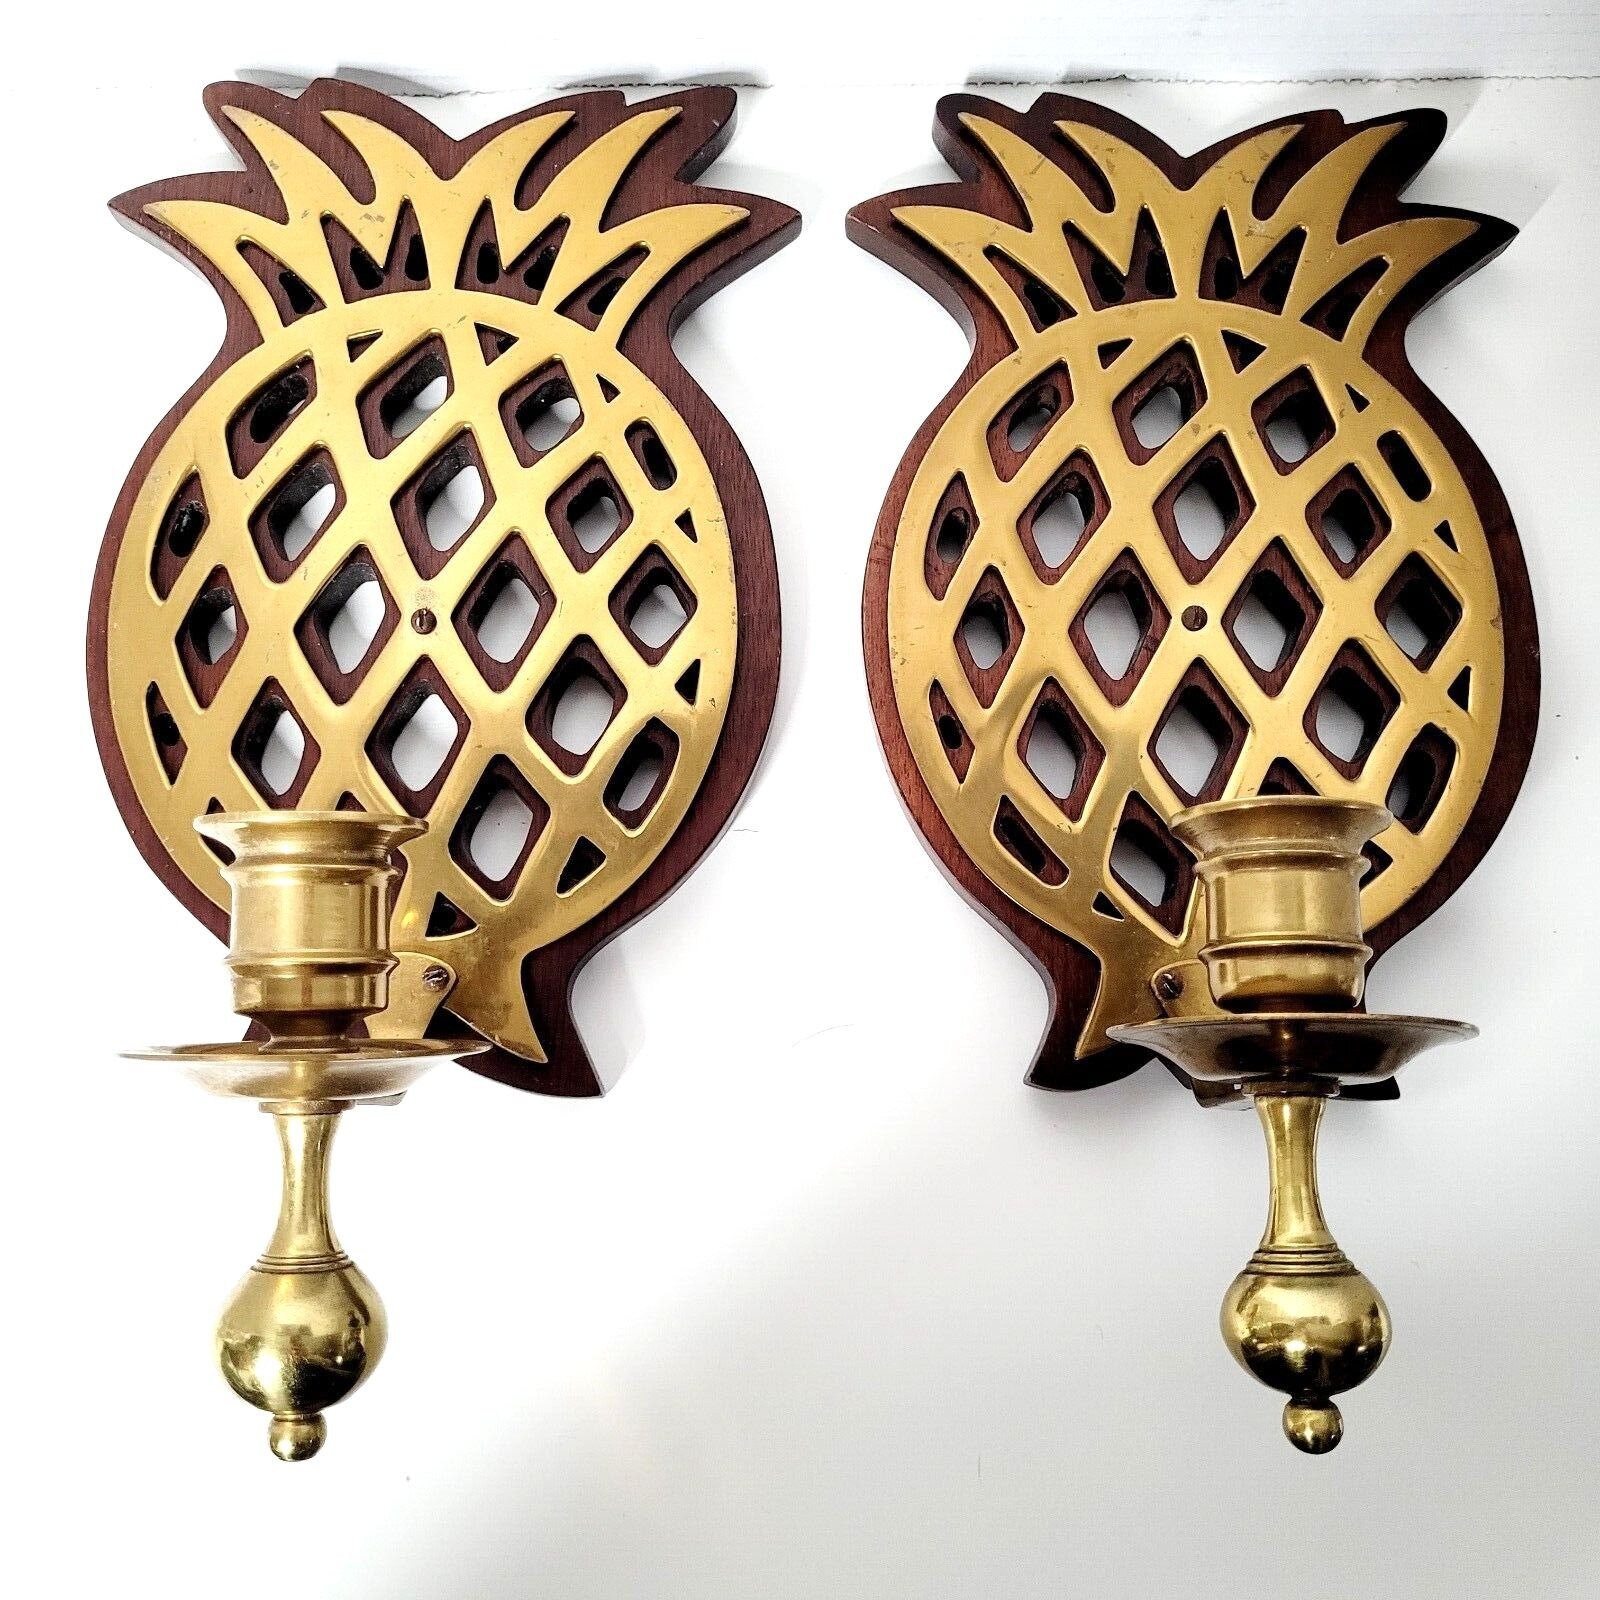 Pineapple Sconce 